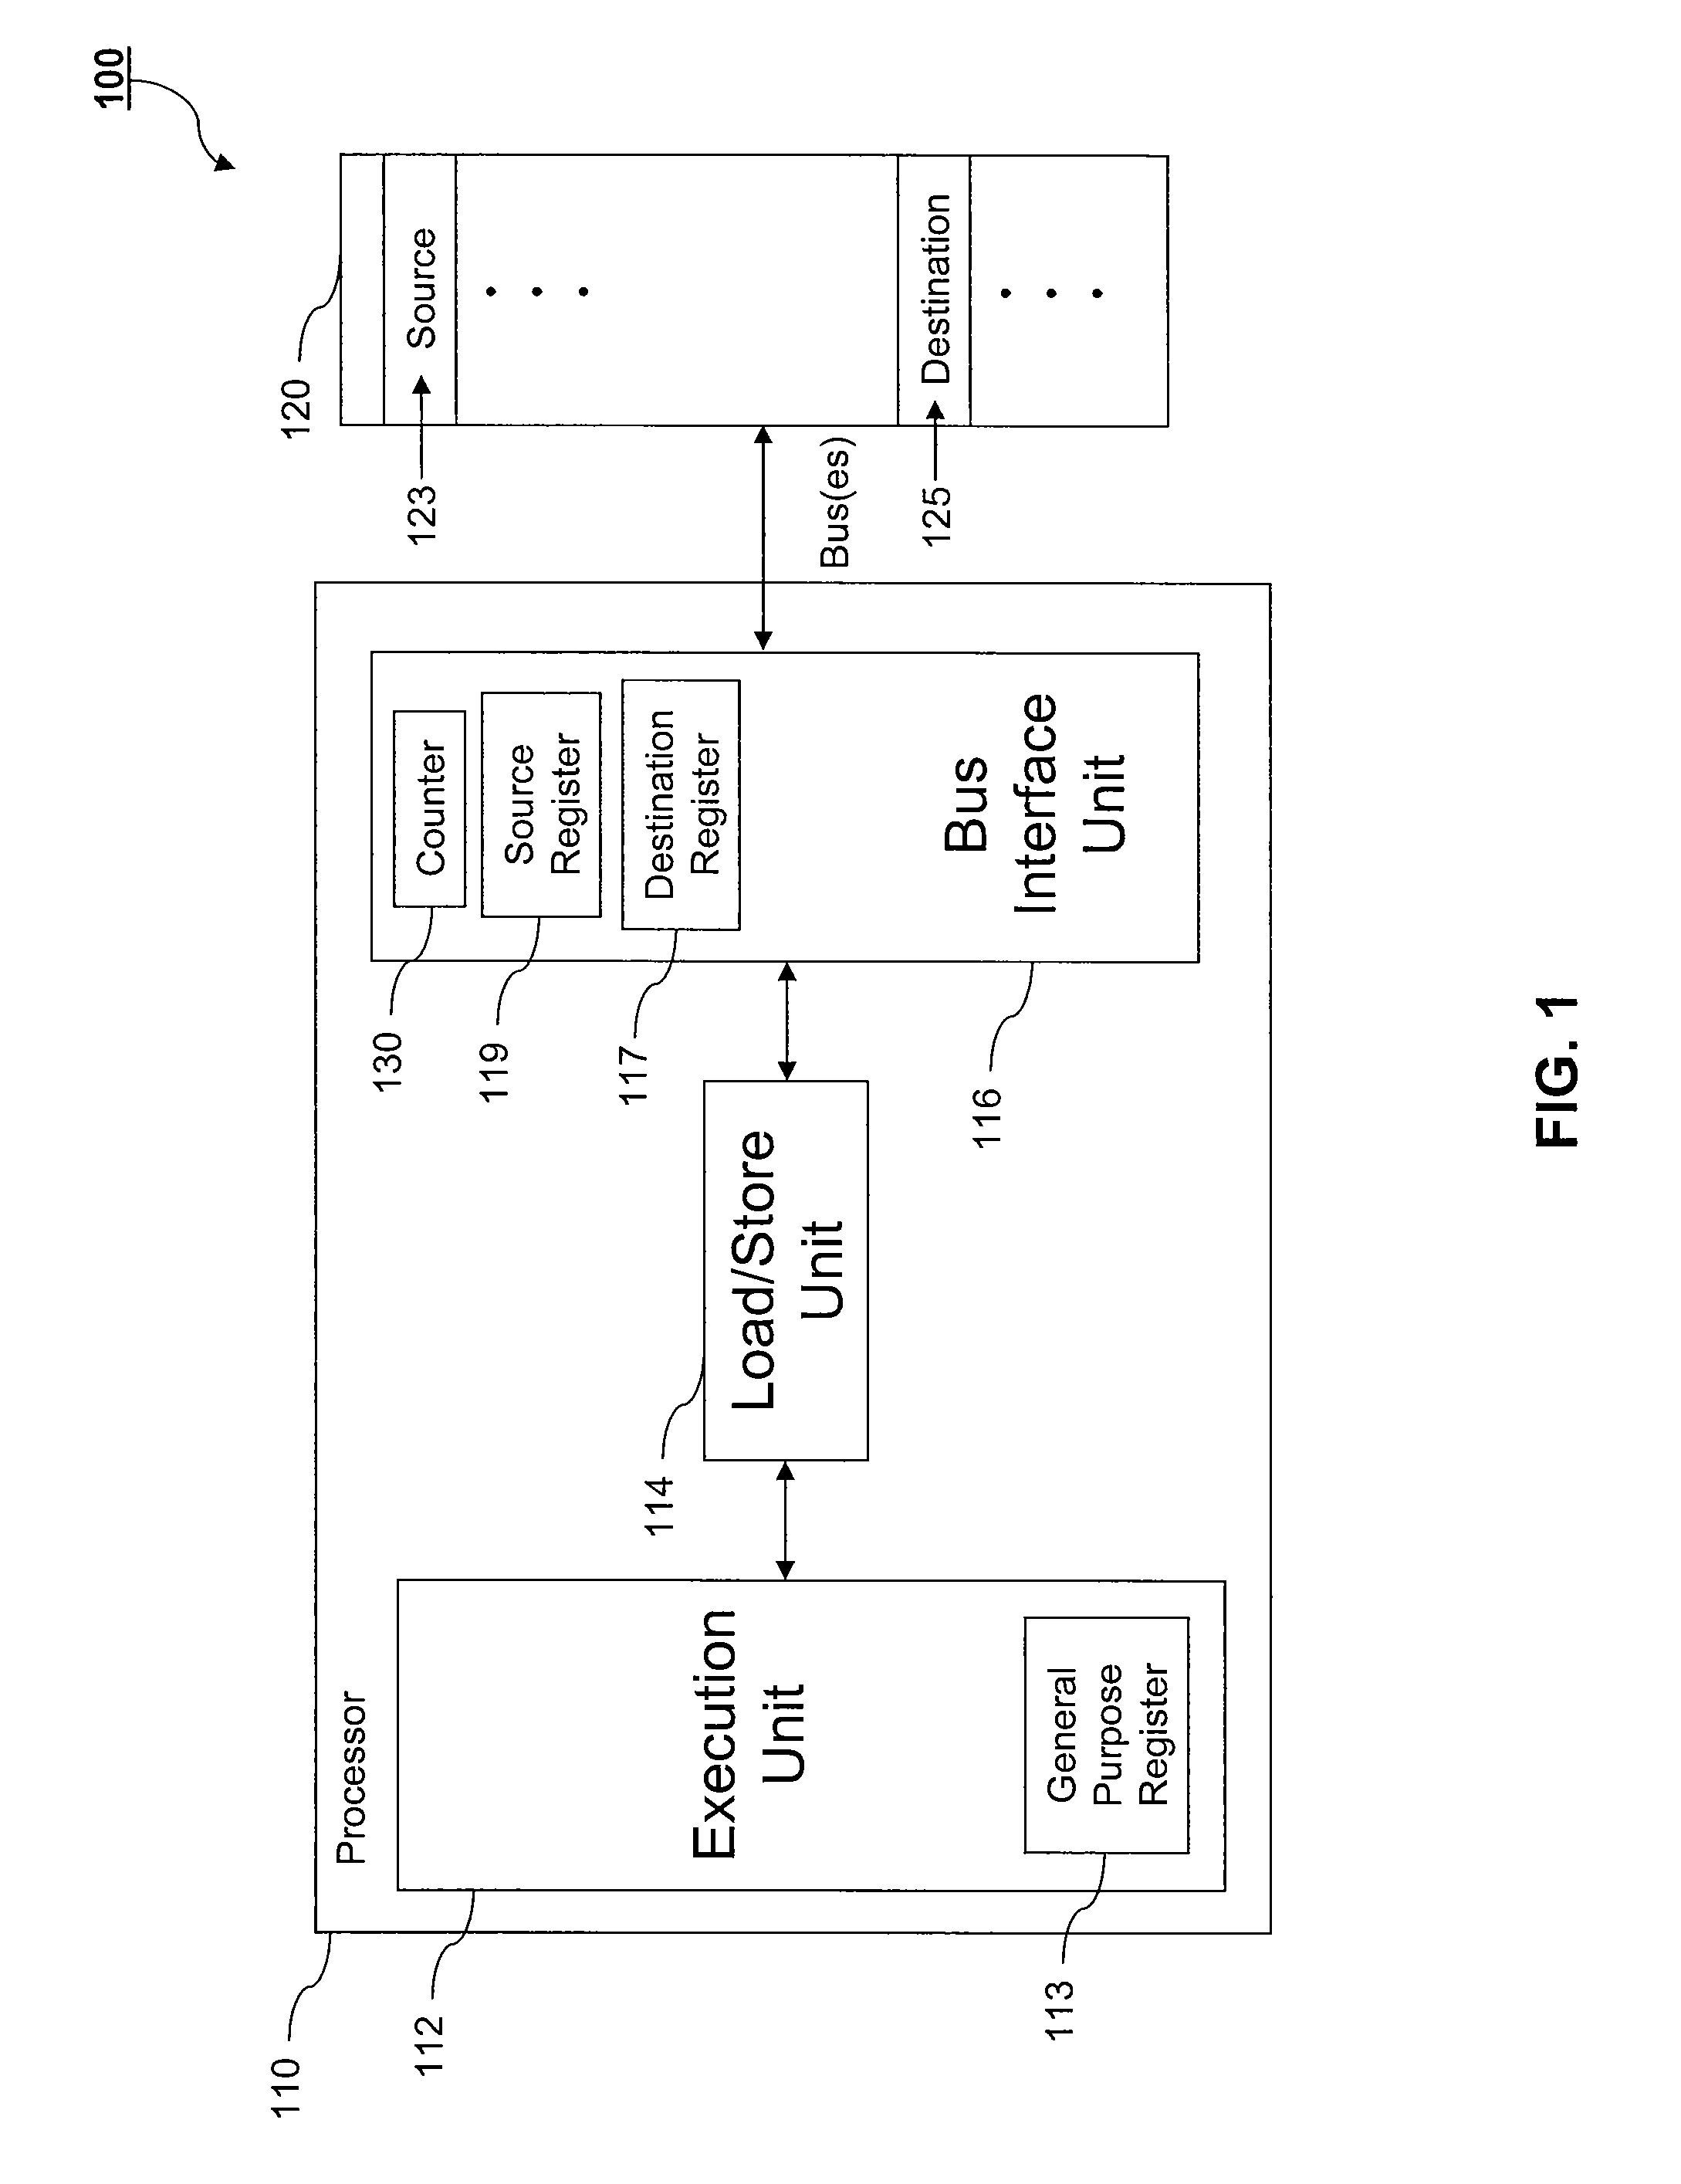 System and Method for Improving Memory Transfer